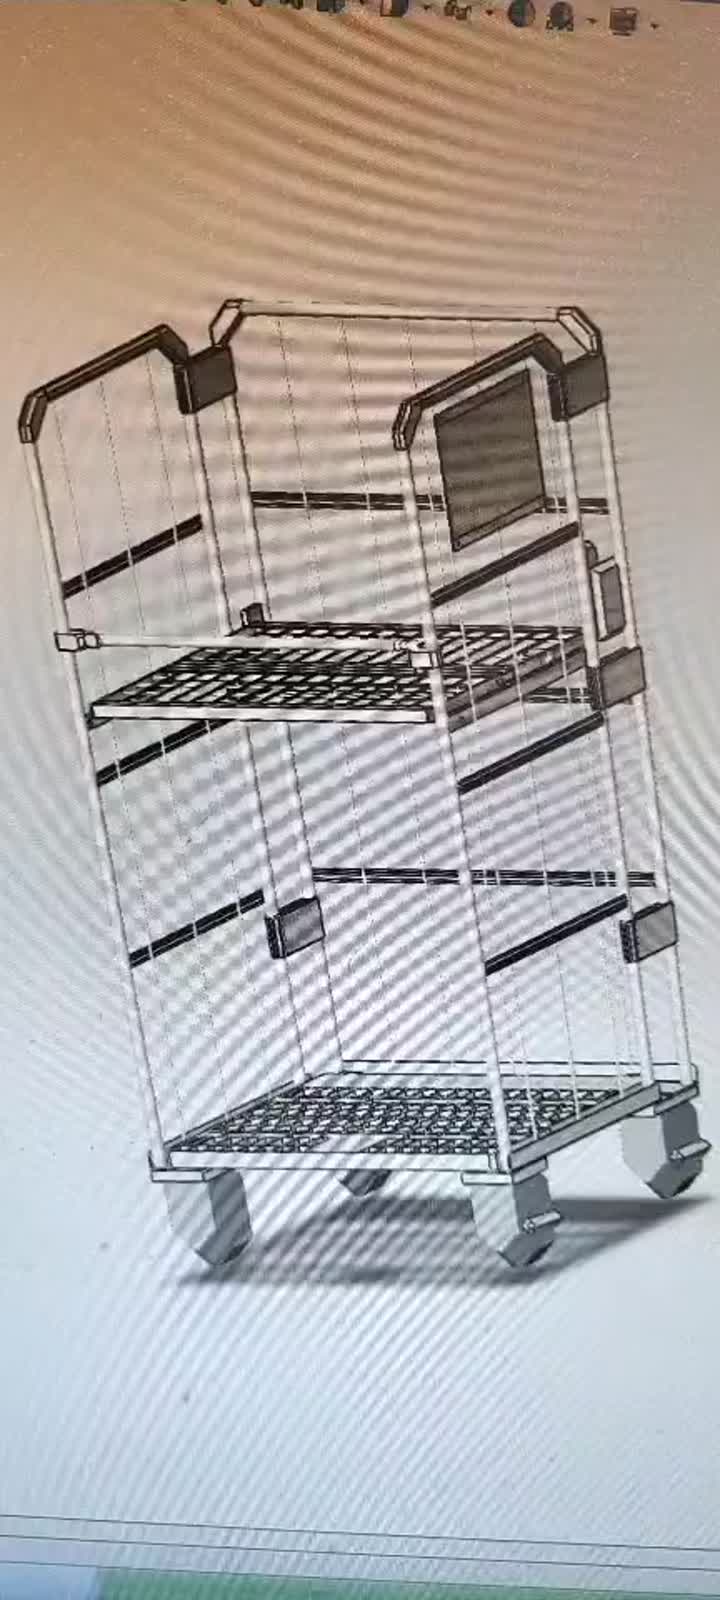 Logistique Trolley.mp4